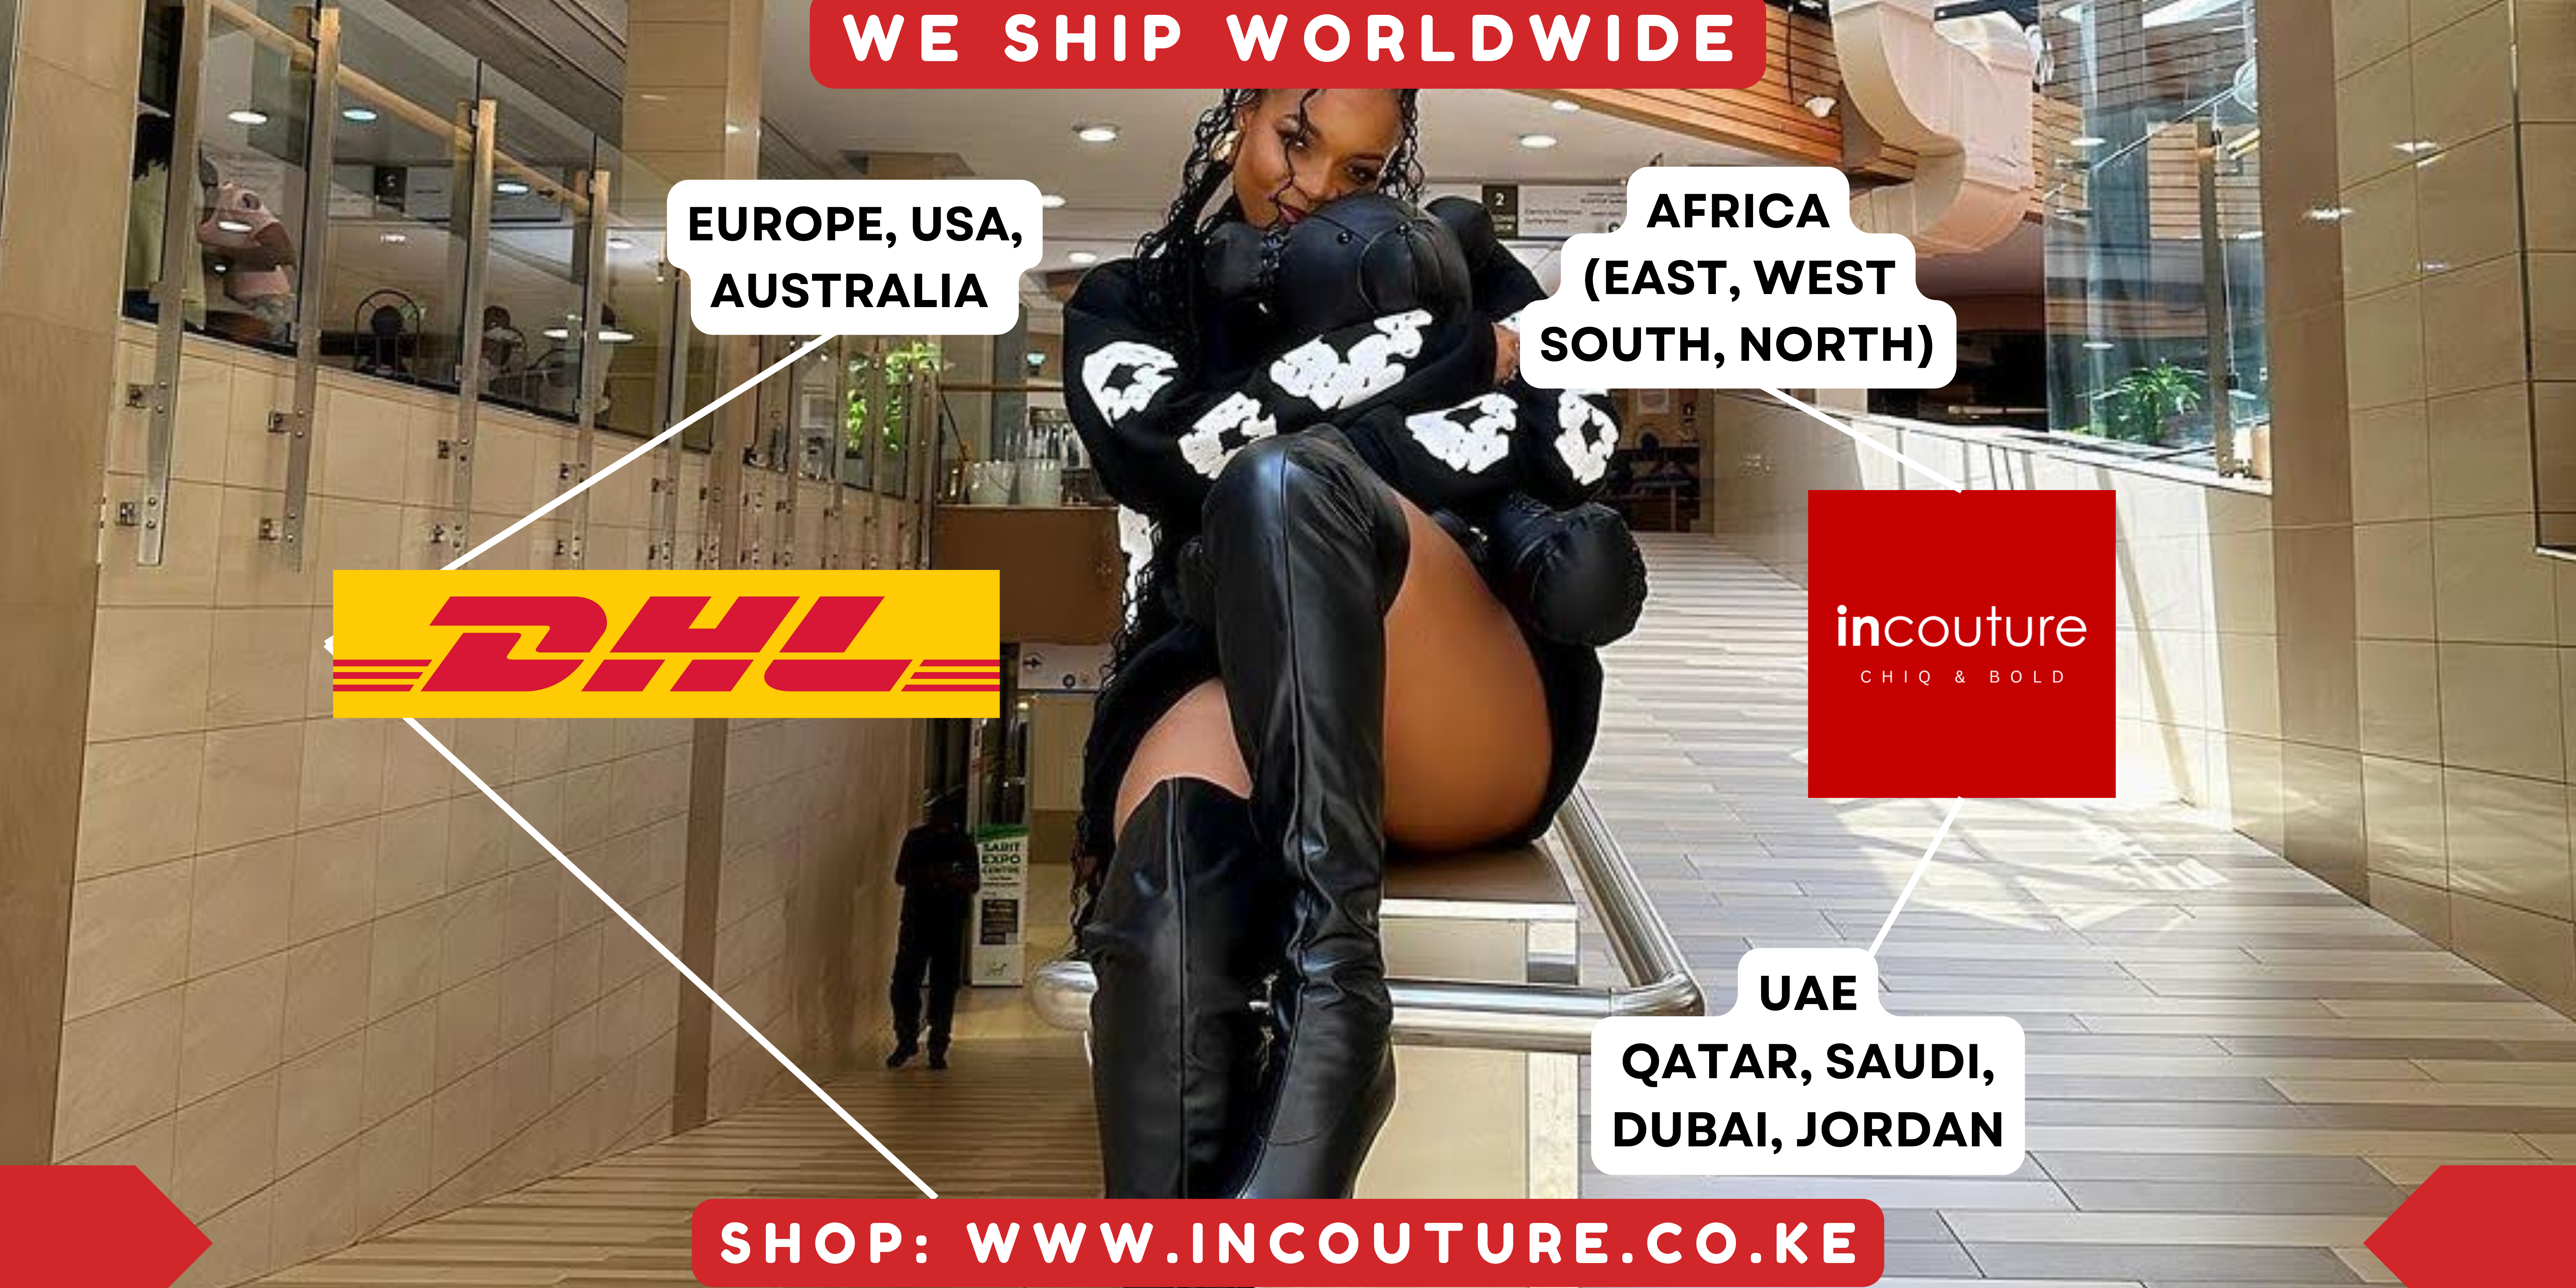 Incouture shipping banner